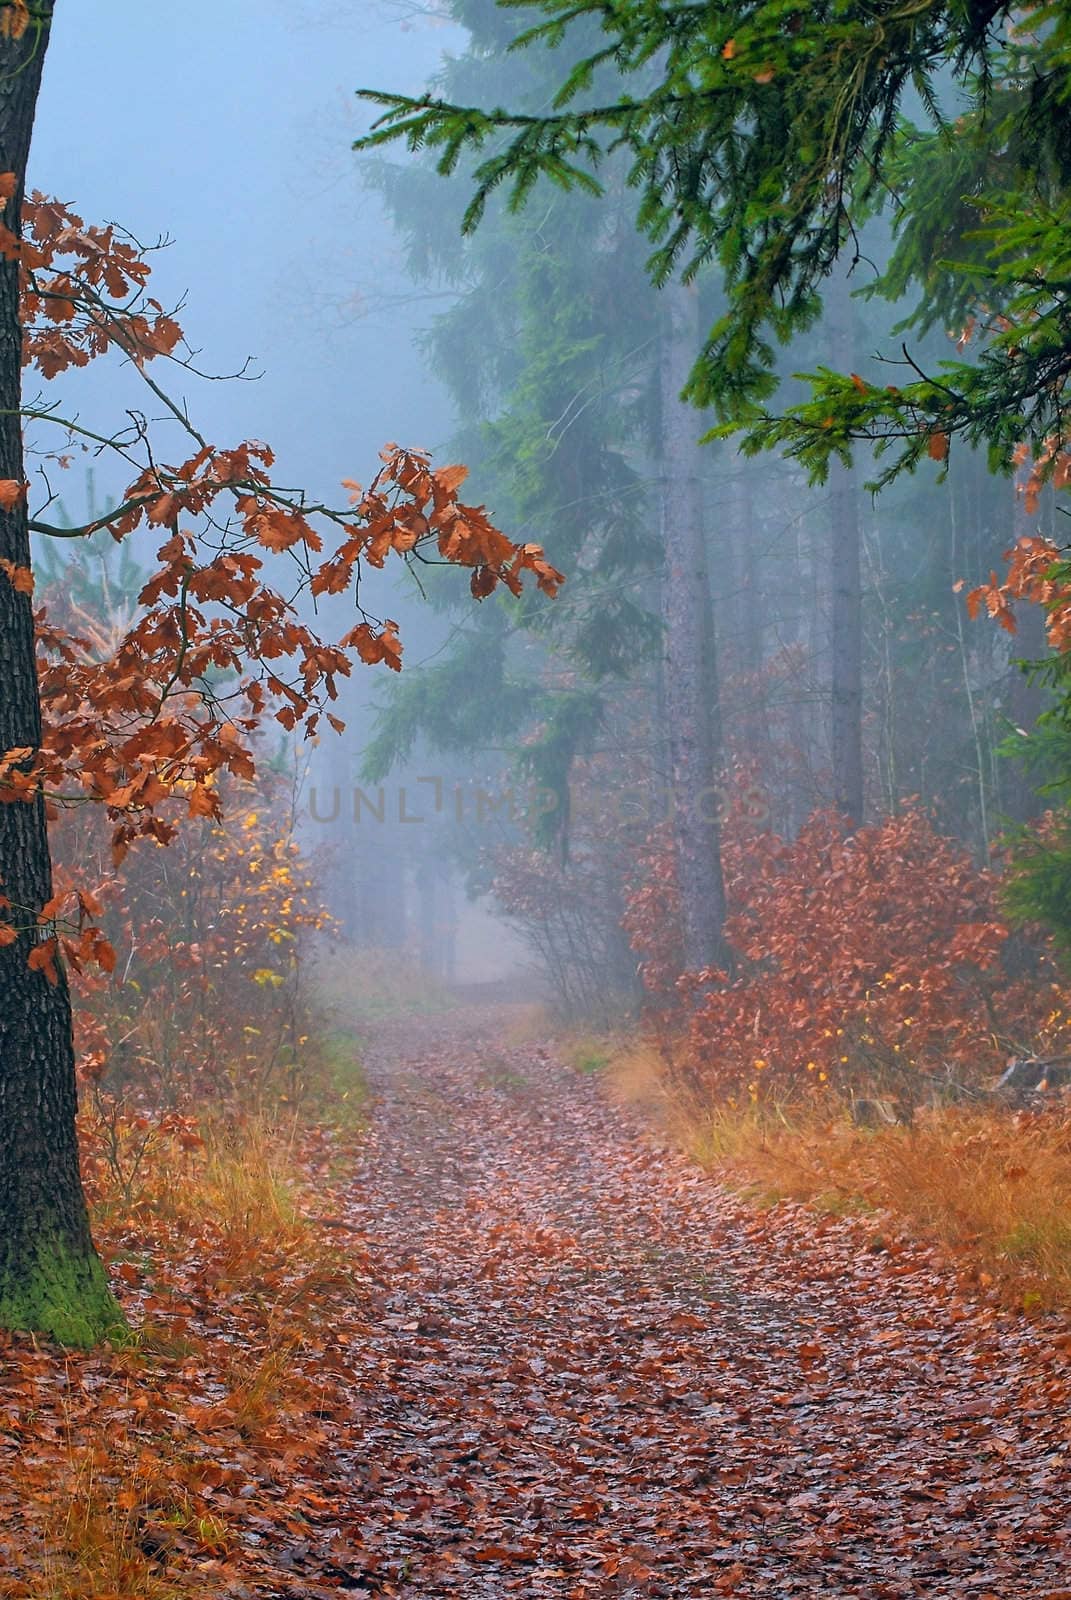 The forest path with fallen autumn leaves